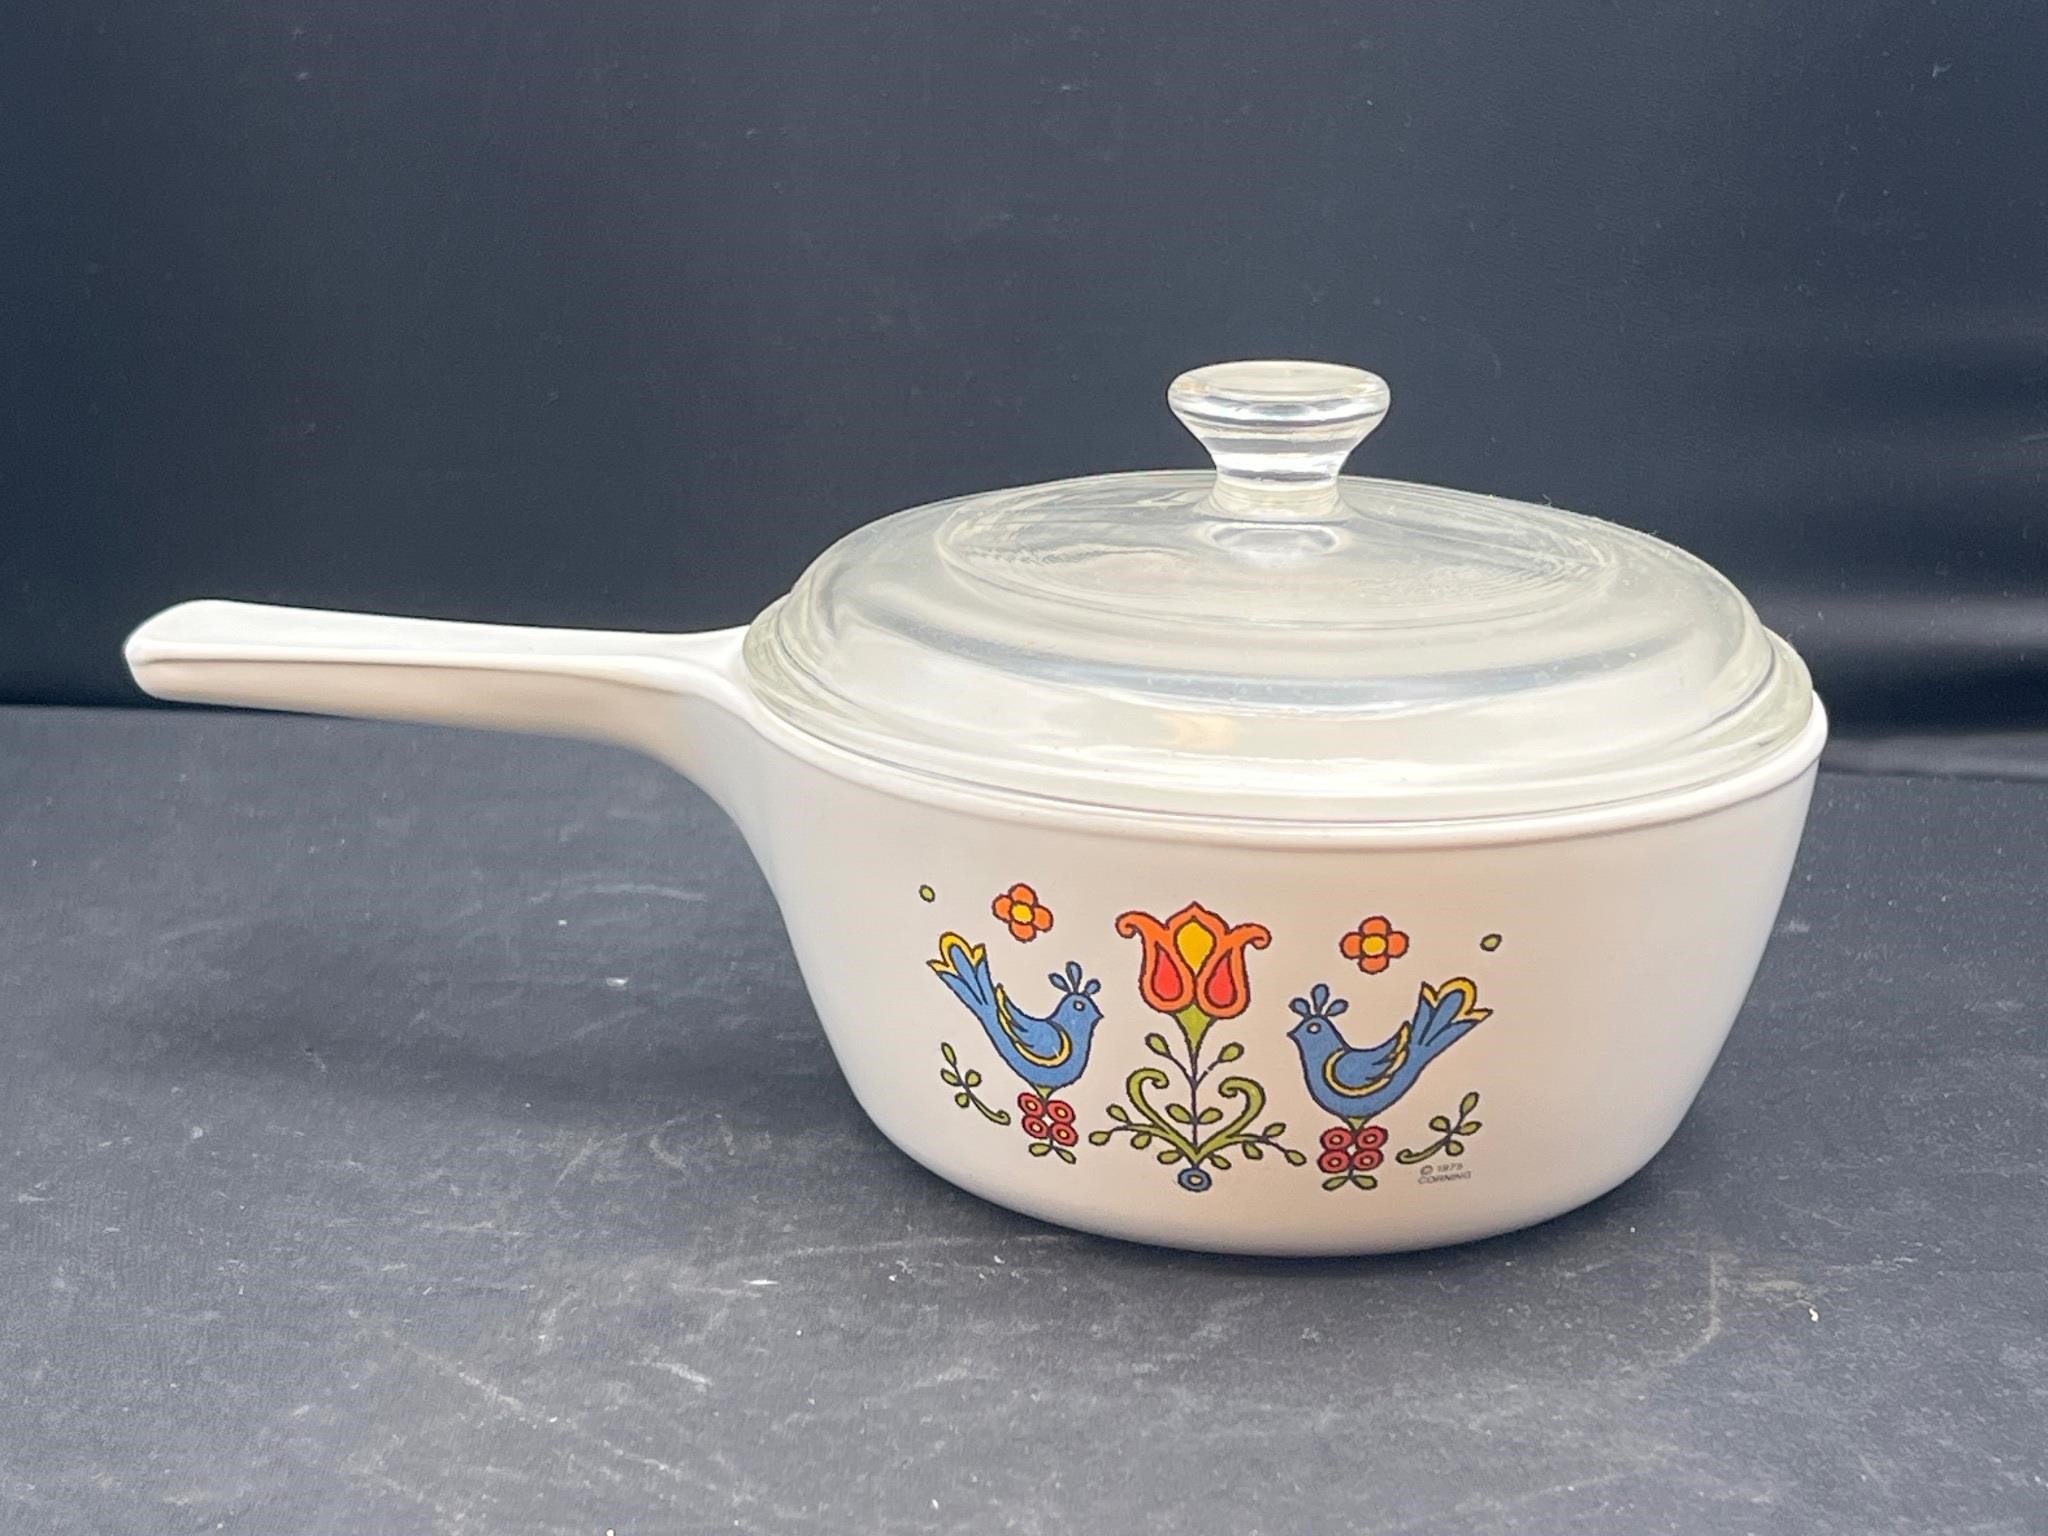 1975 Corning ware Country Festival Sauce Pan